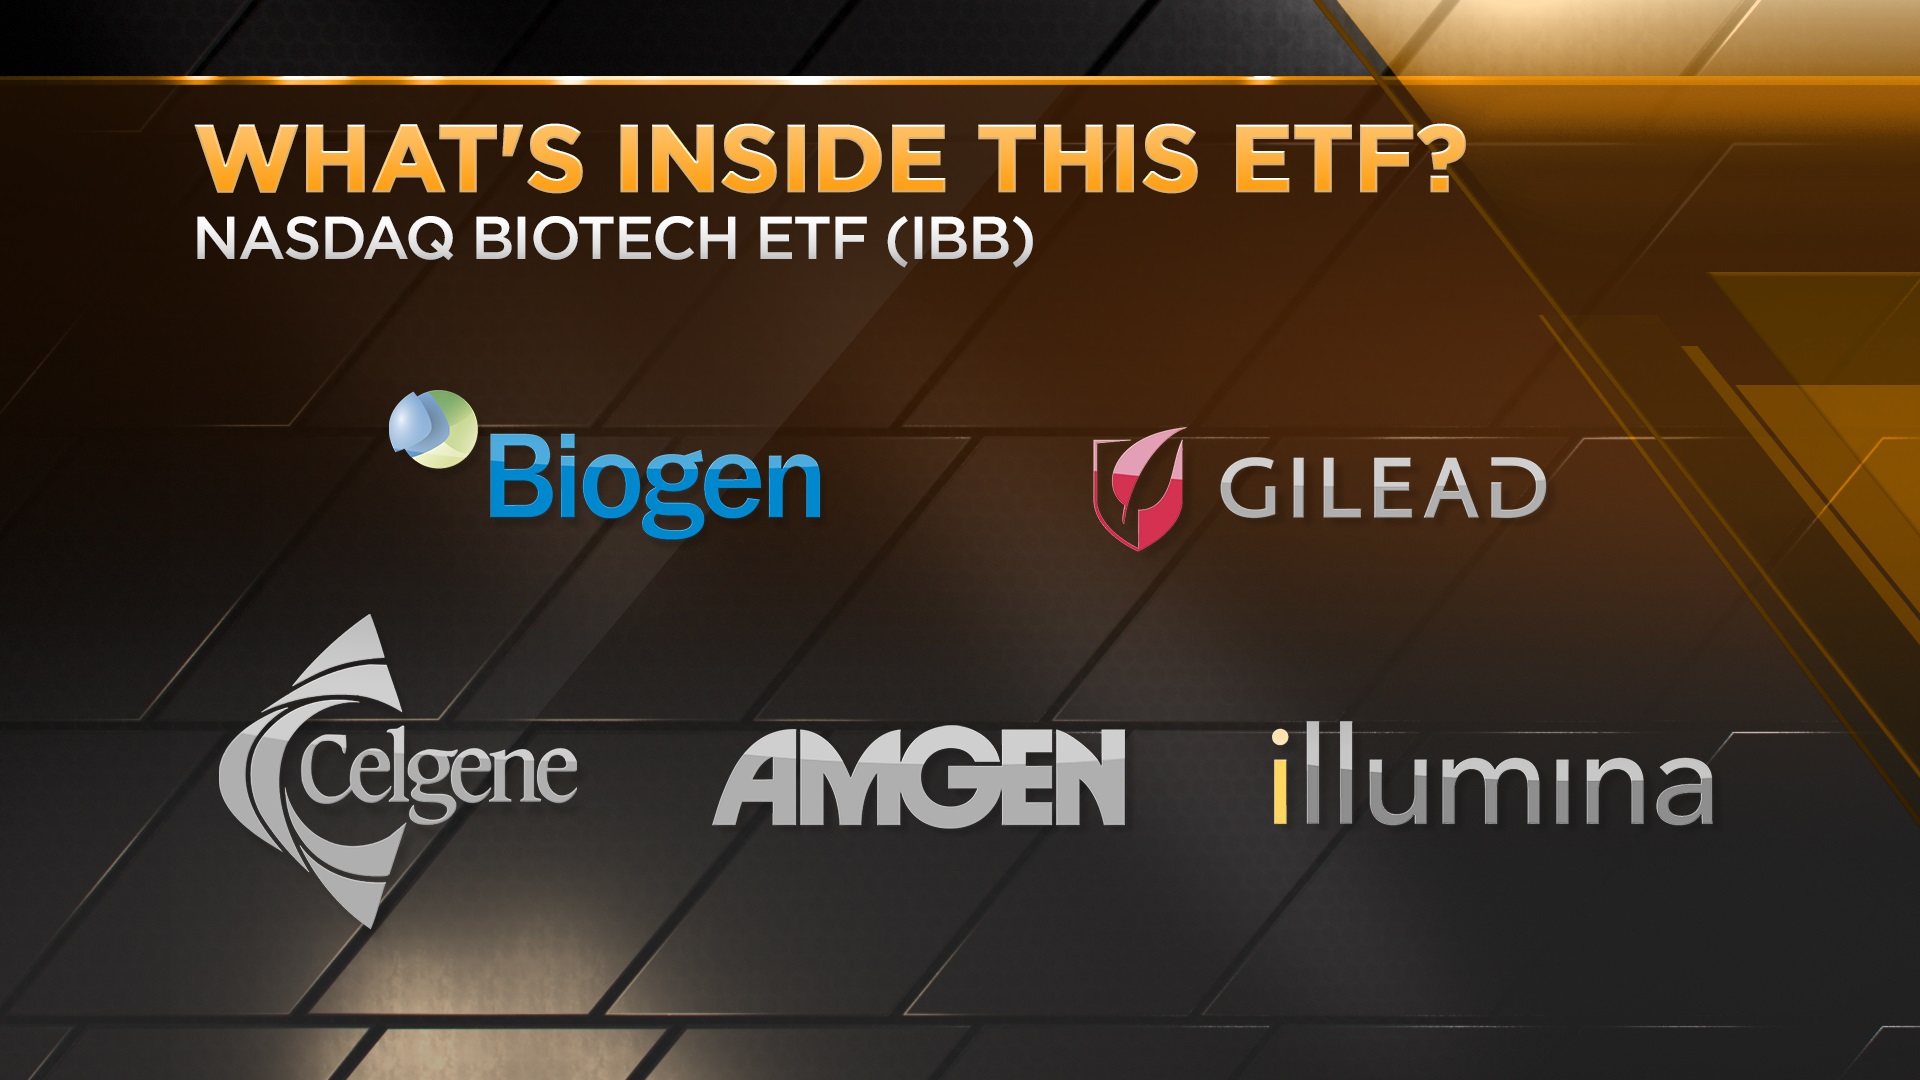 Two ways to play the biotech boom